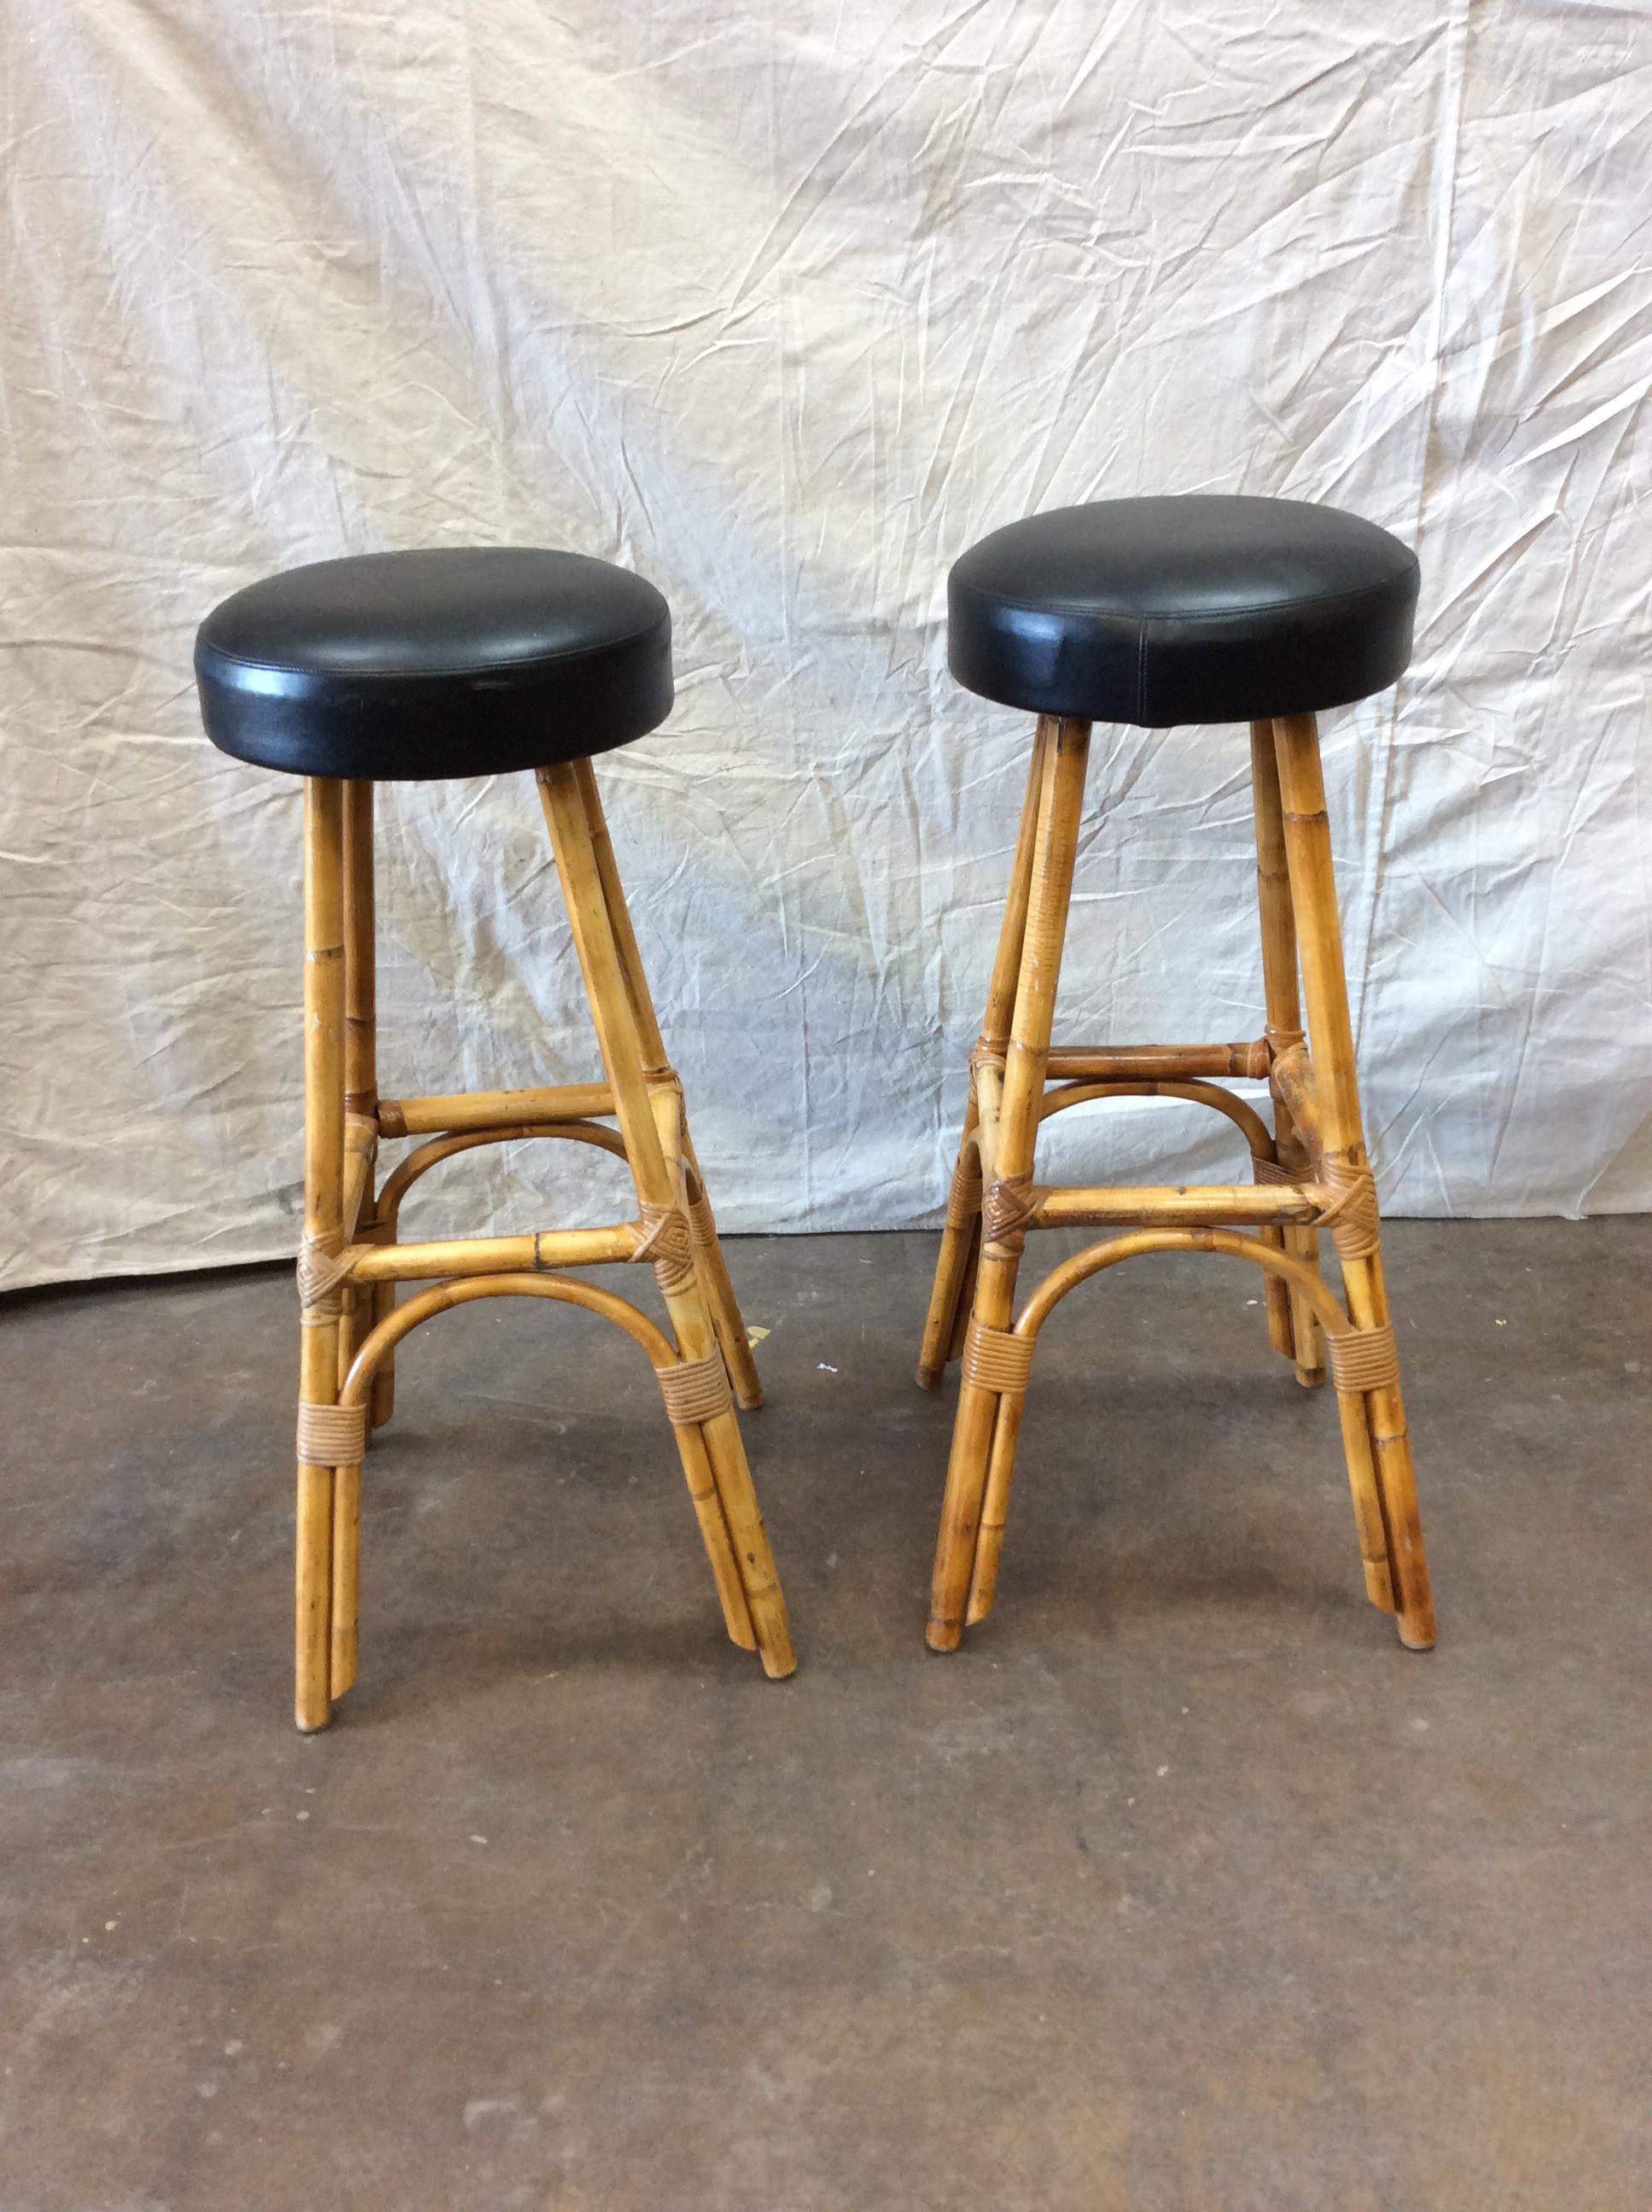 This pair of vintage bamboo barstools with black leather seats were made in France in the 1950s. With minor signs of wear on the seat, the stools are sturdy and ready for use. Bring a touch of the French Riviera to your home.

Each stool